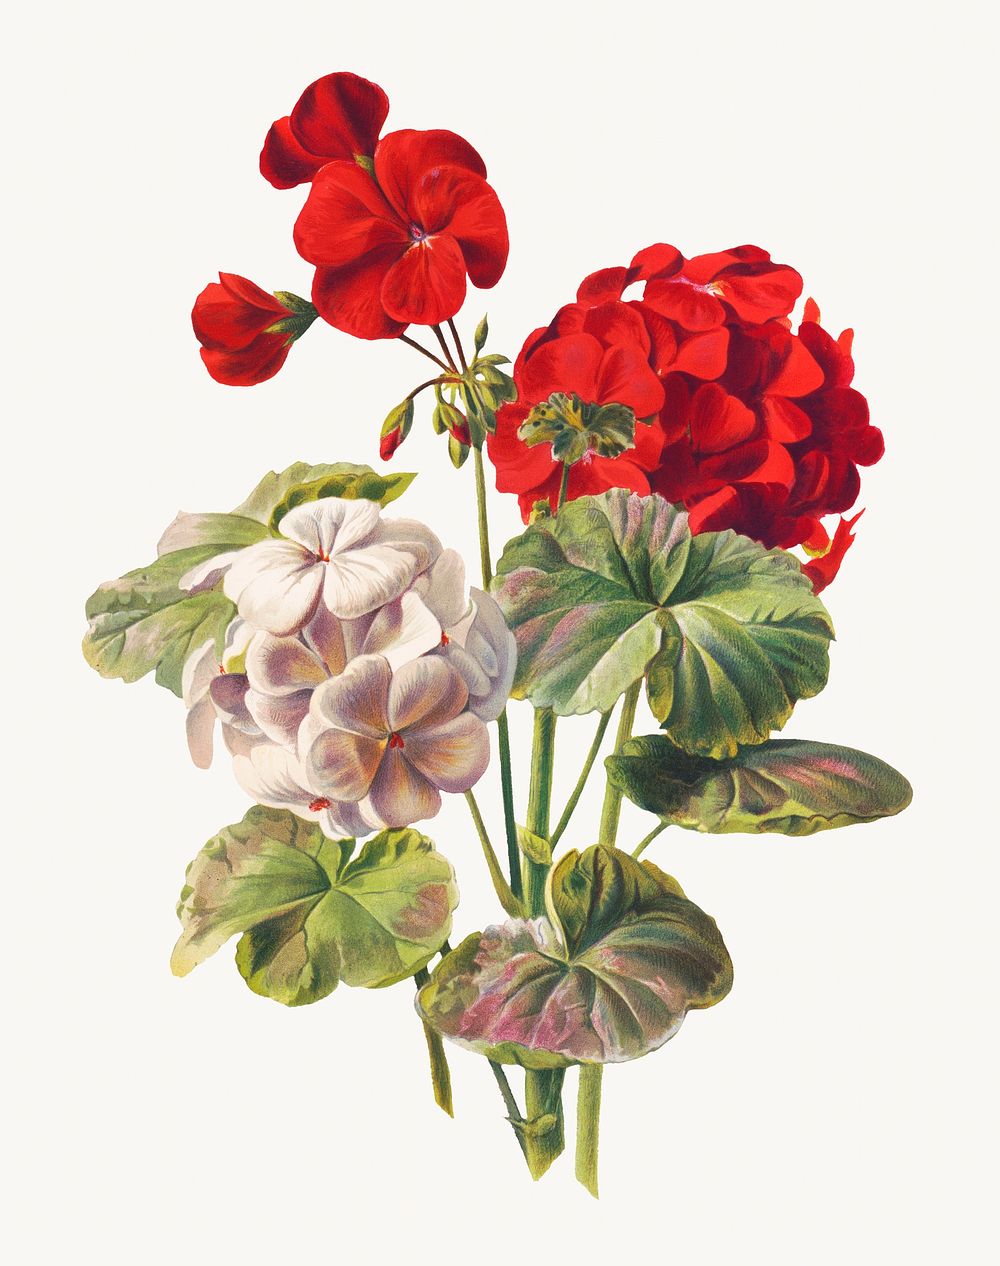 Geranium (1874) in high resolution by L. Prang & Co. Original from The Library of Congress. Digitally enhanced by rawpixel.